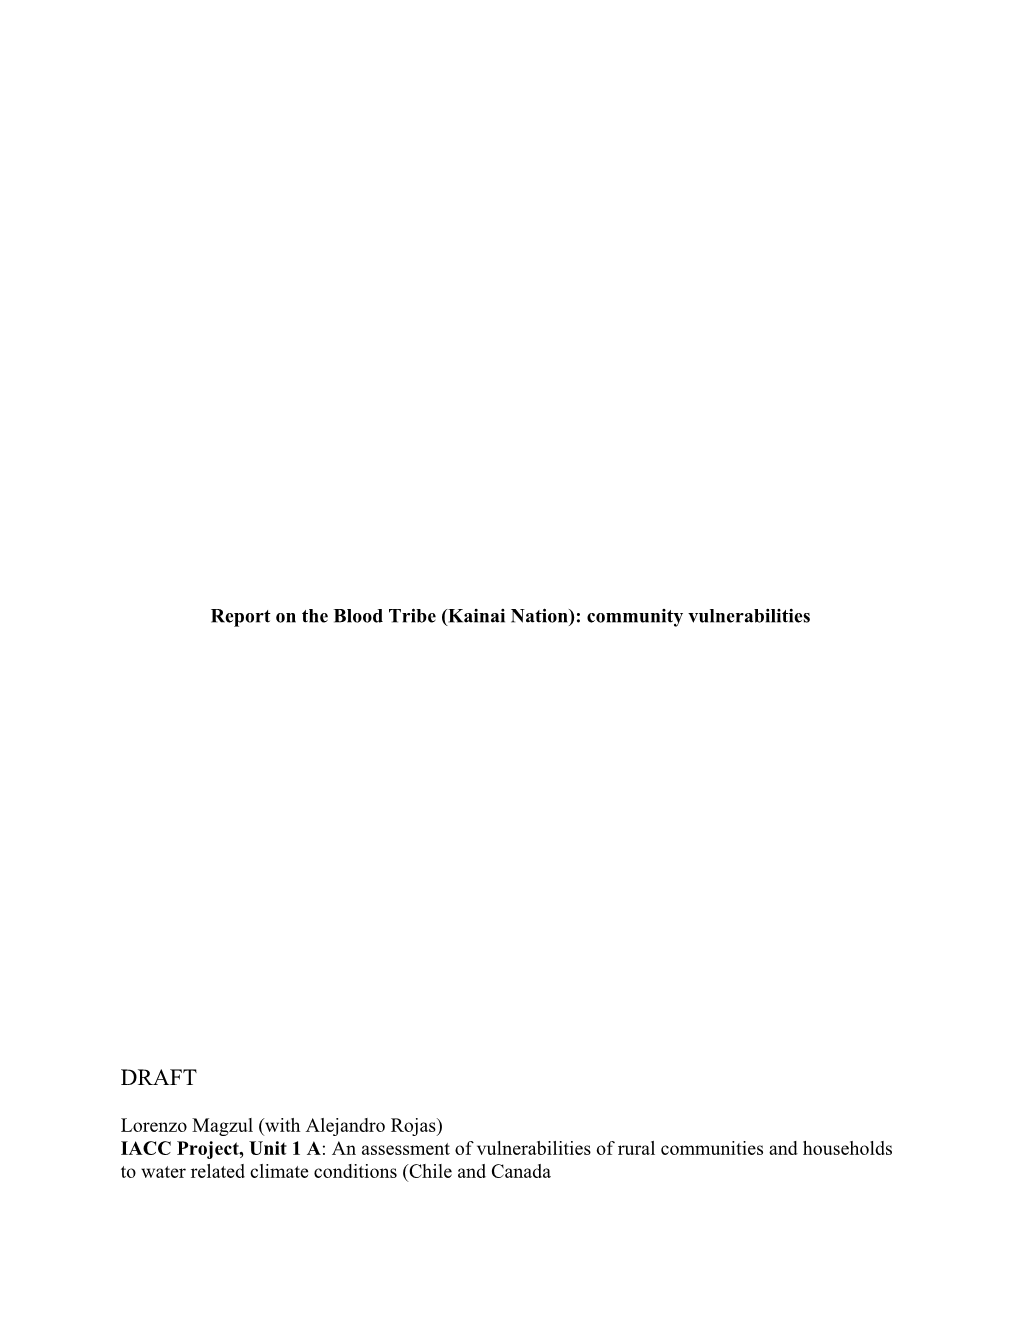 Report on the Blood Tribe (Kainai Nation): Community Vulnerabilities